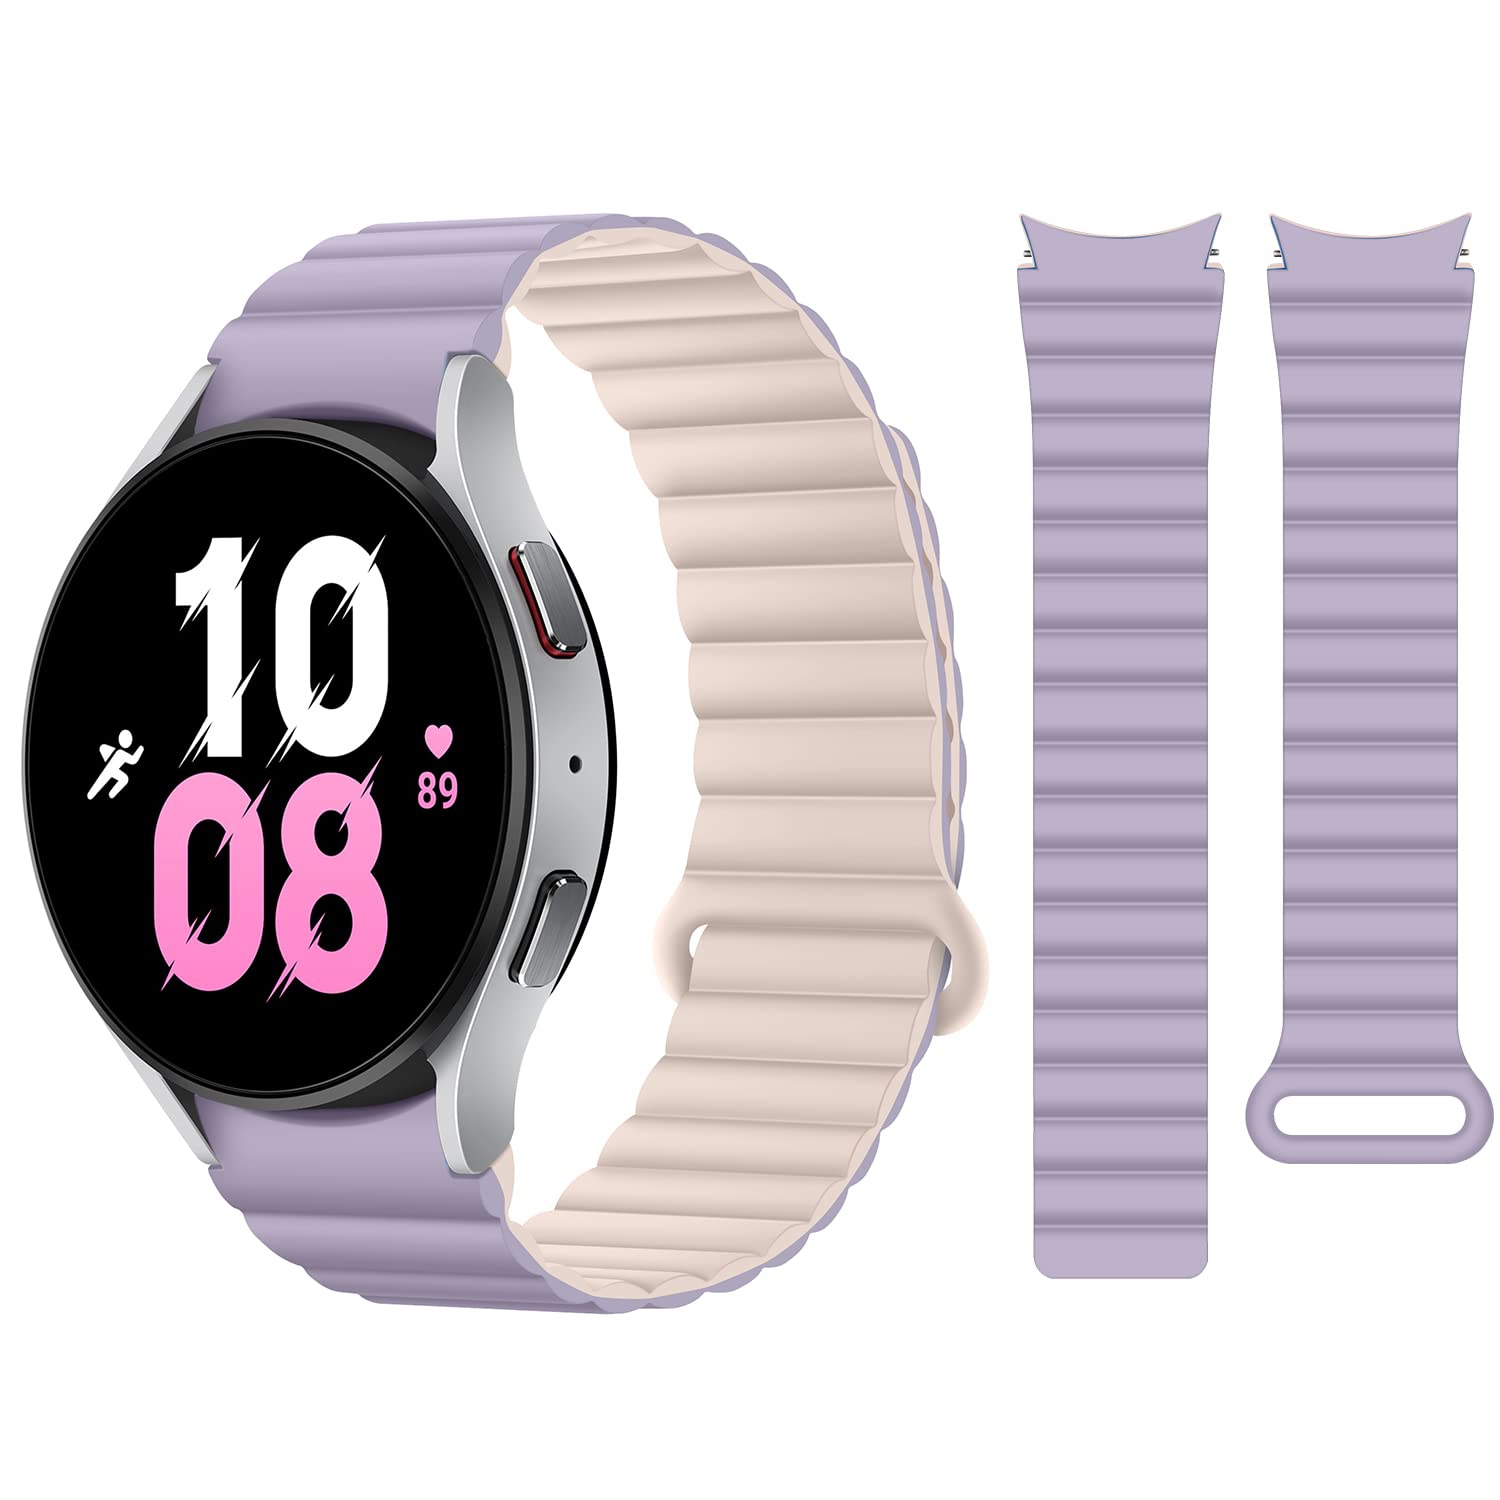 HITZEE Bands Compatible with Samsung Galaxy Watch 4 Band 40mm 44mm Galaxy Watch 5, 20mm Silicone Magnetic Loop Sport Strap Bracelet for Galaxy Watch 4 Classic/Watch 5 Pro, Purple P